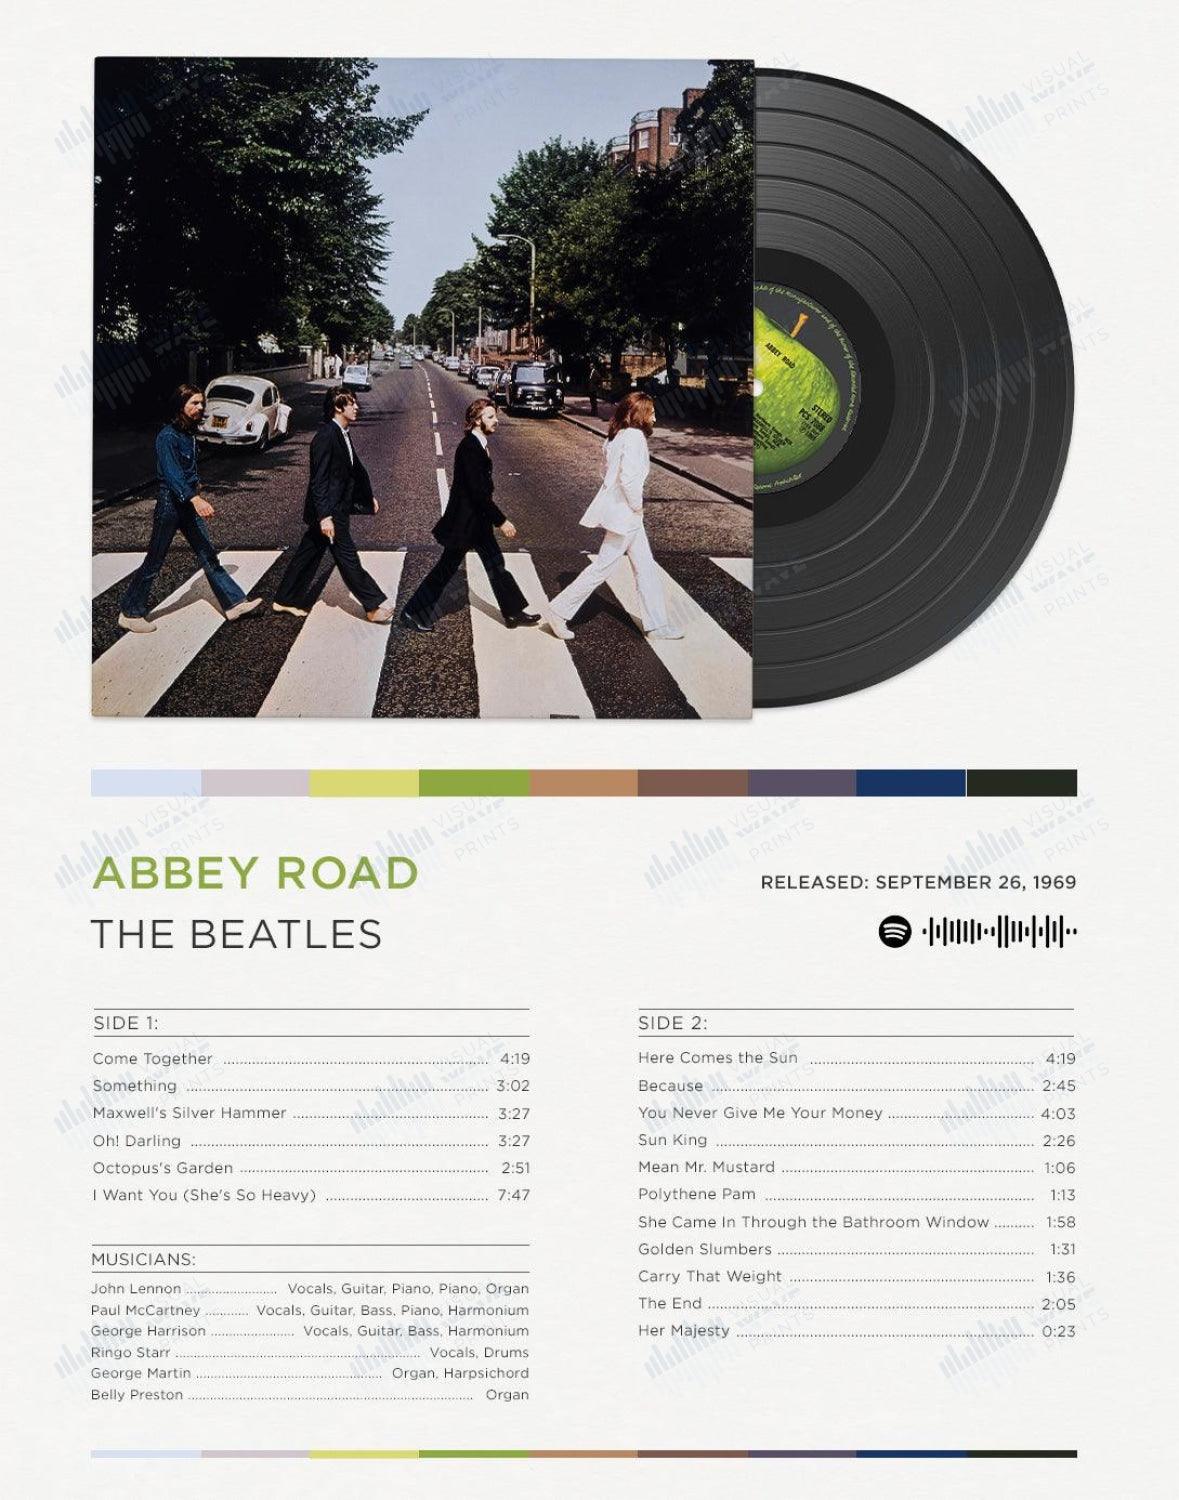 The Beatles - Abbey Road (Full Cover Album) 